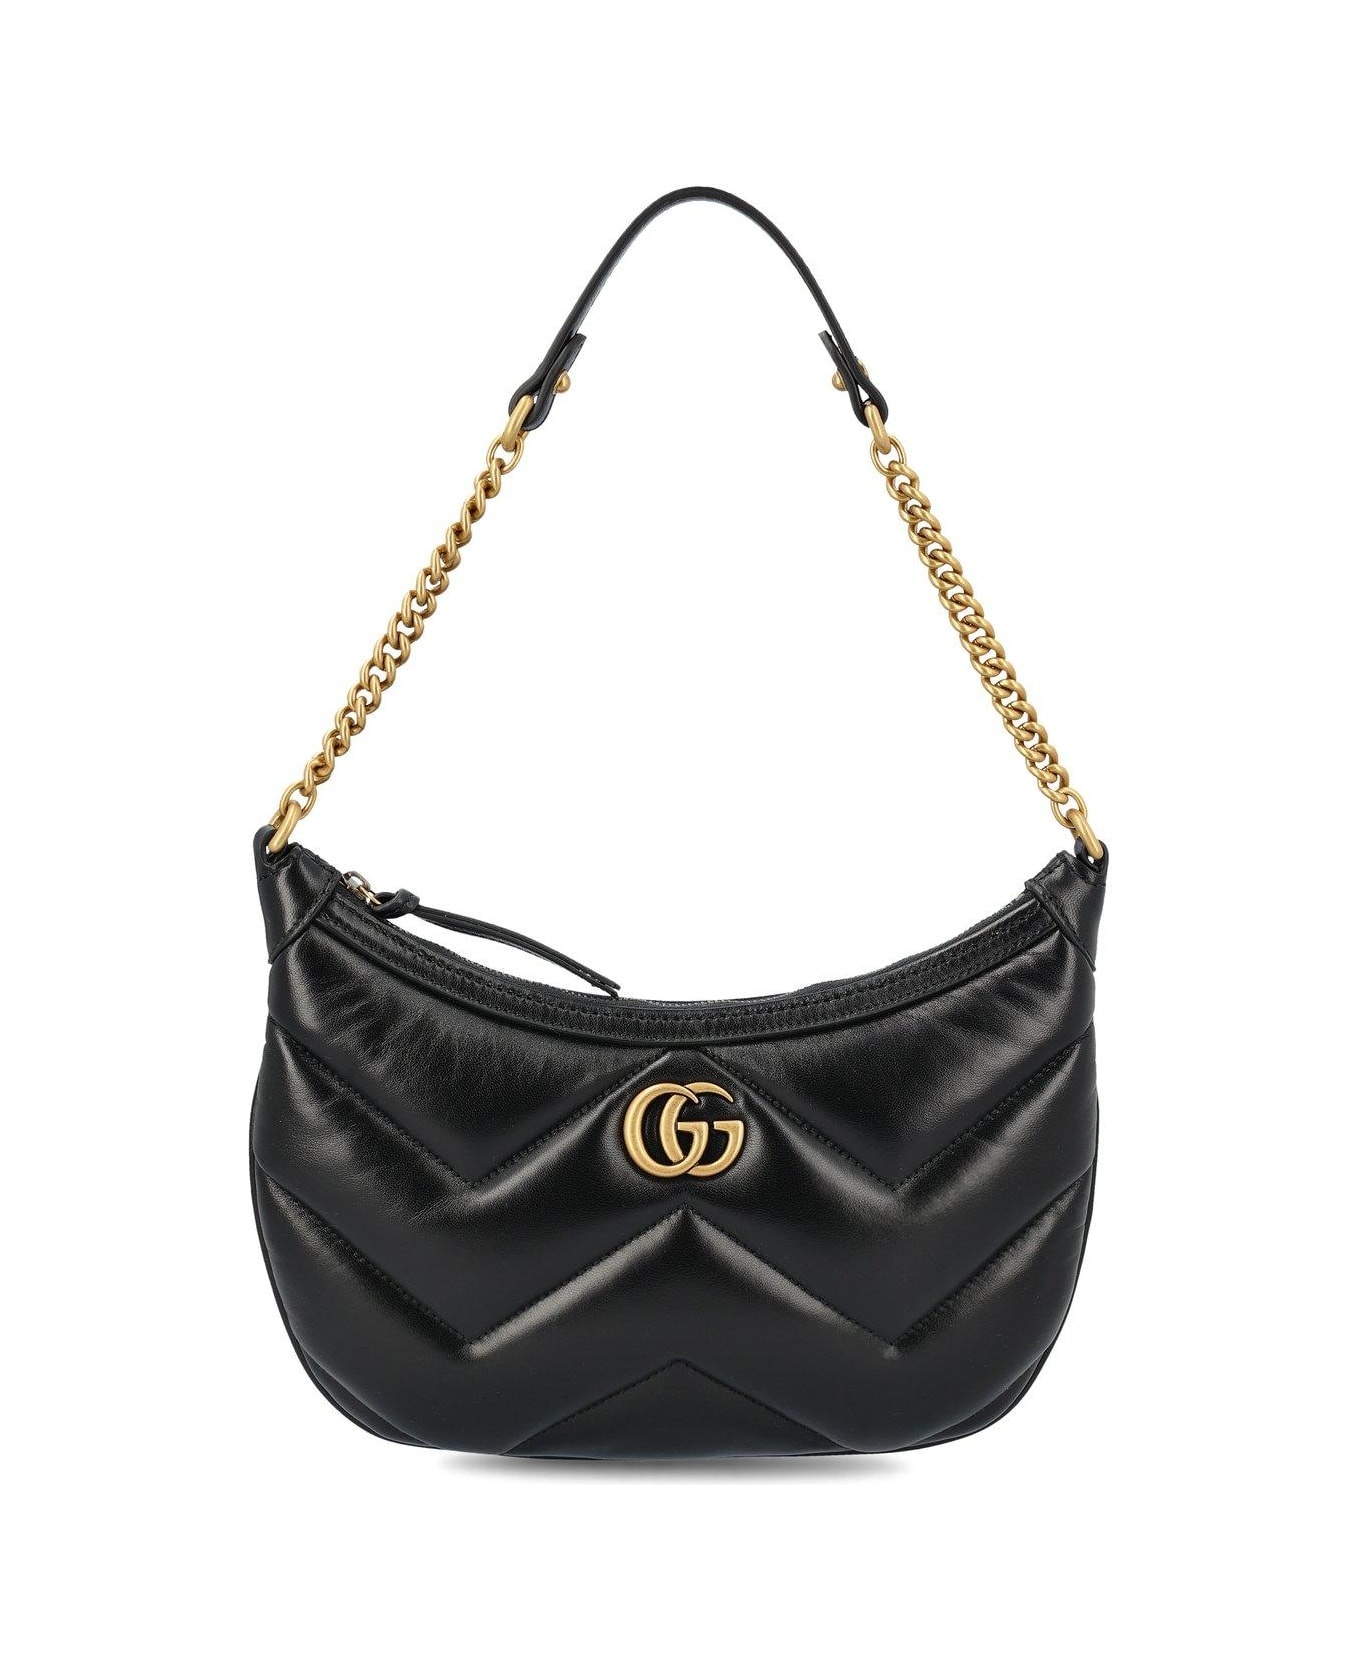 Gg Marmont Small Shoulder Bag - 1